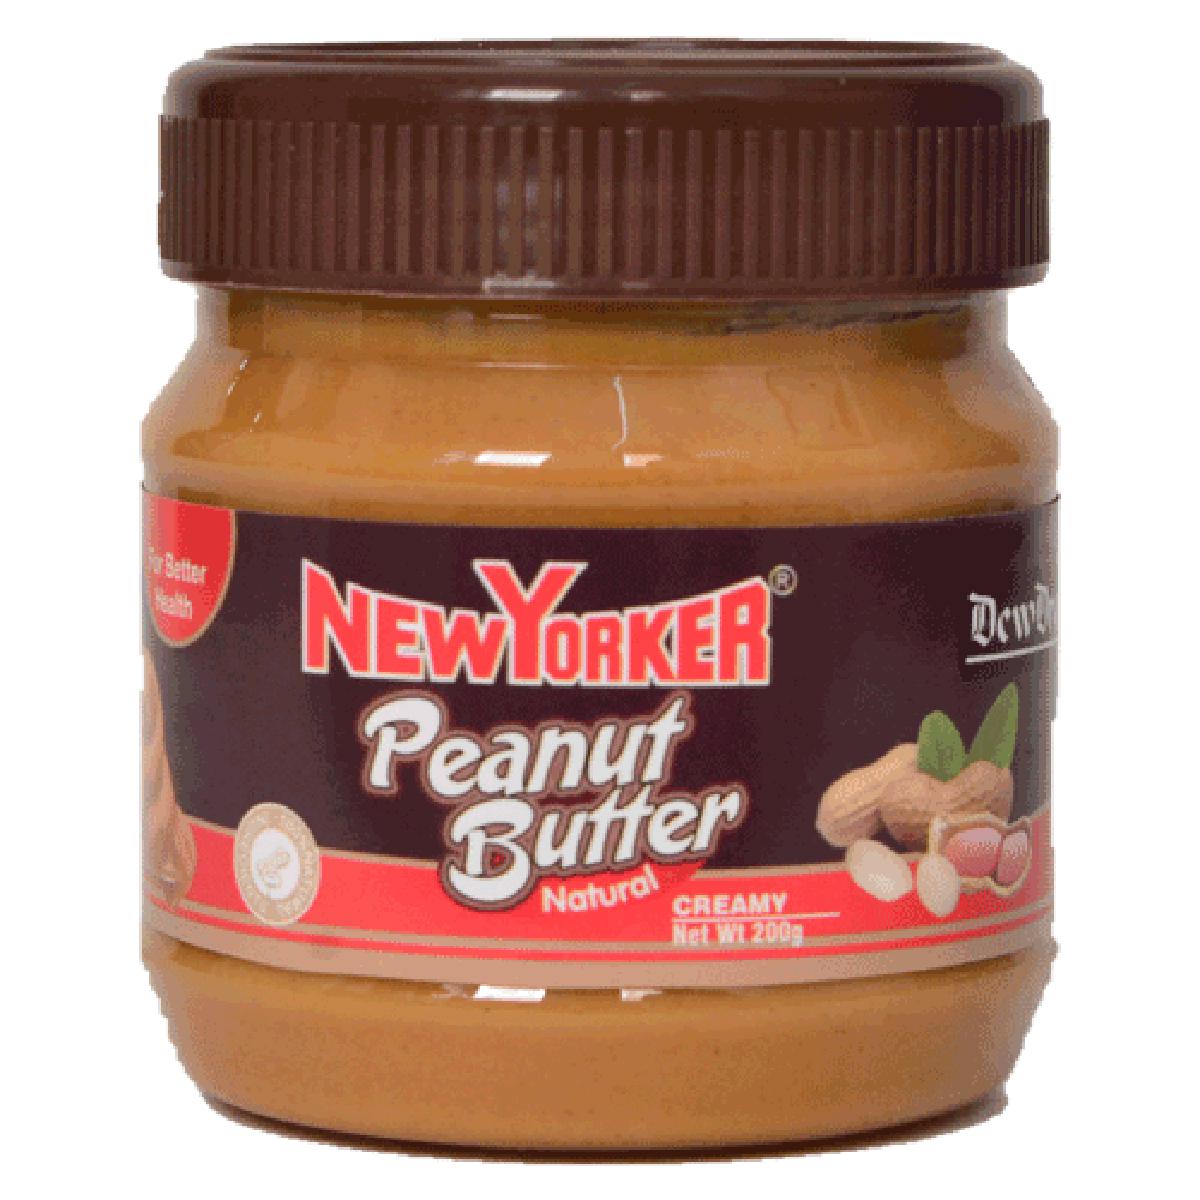 New Yorker - Peanut Butter 200 G Creamy- Pack Of 12